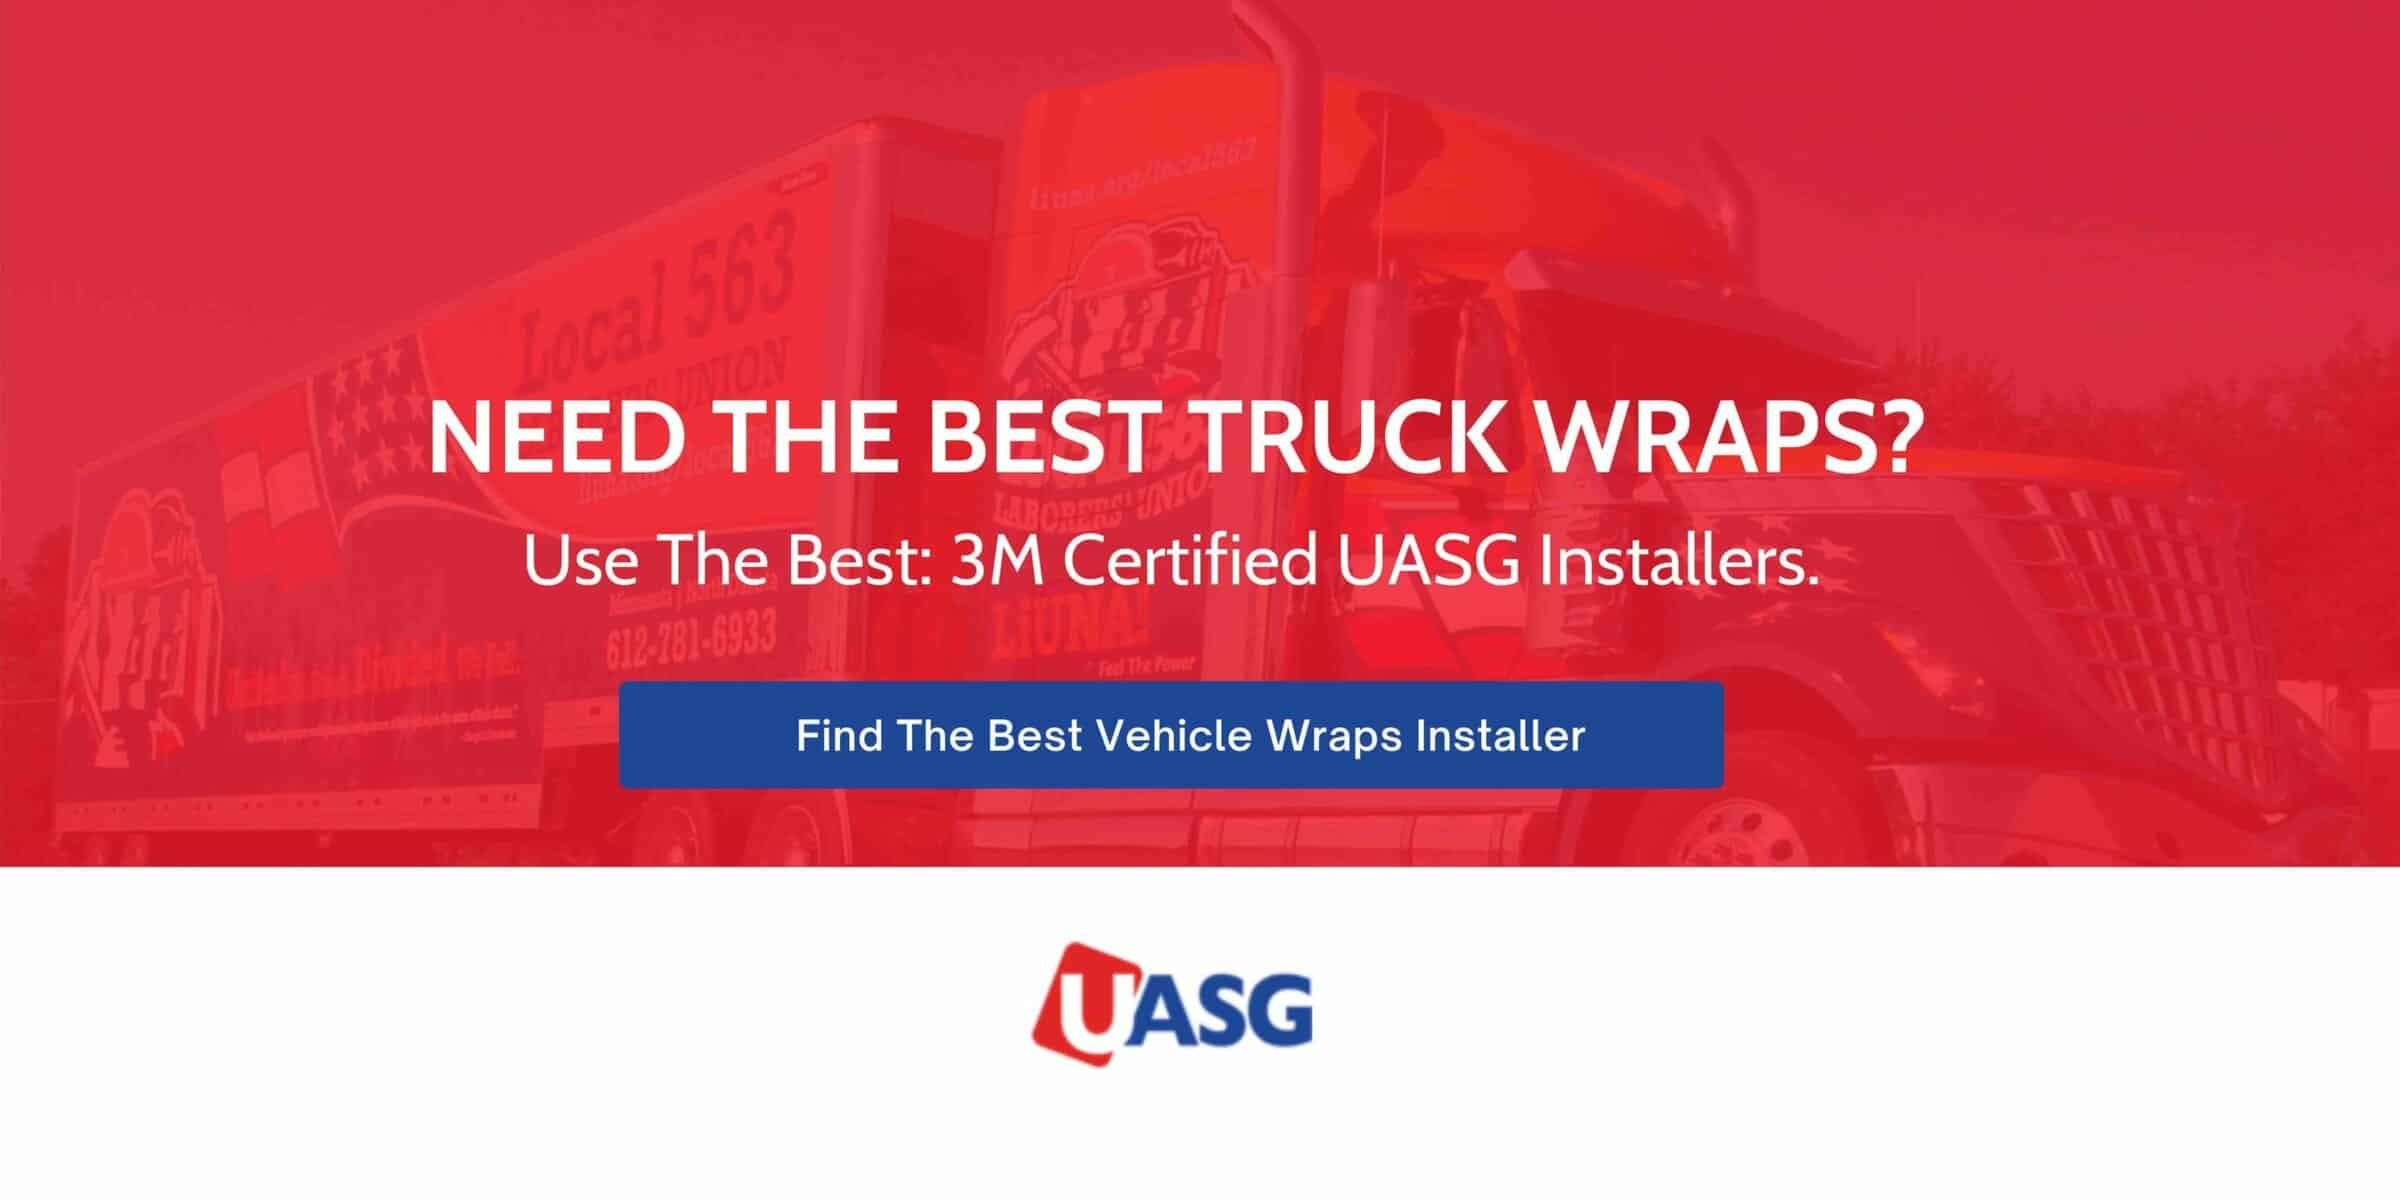 Image with semi truck in background and text promoting UASG truck wrap installers.